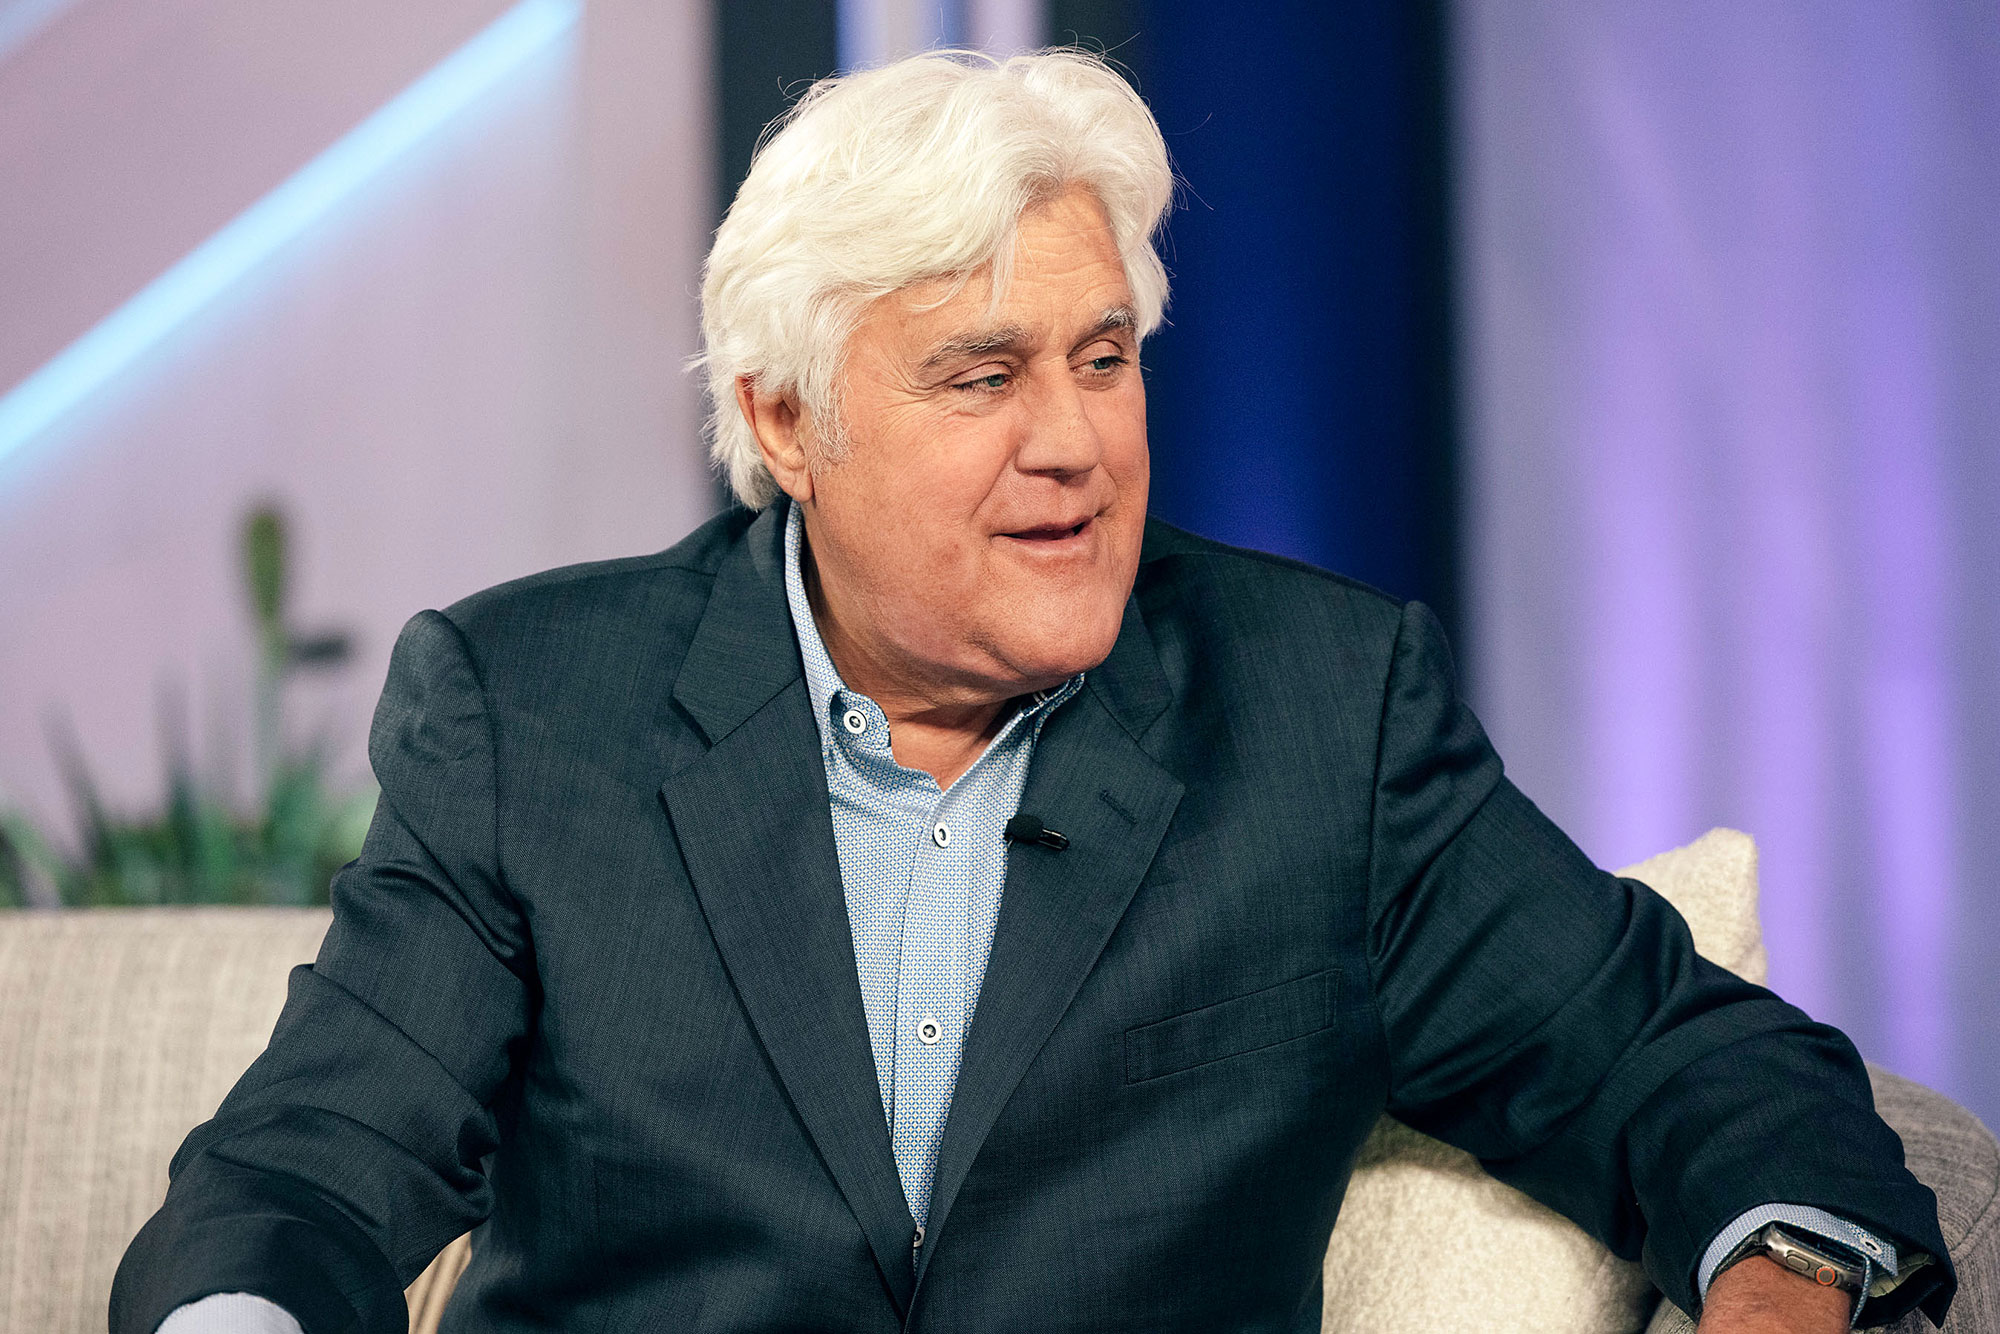 Jay Leno's Gasoline Fire Accident: Everything to Know